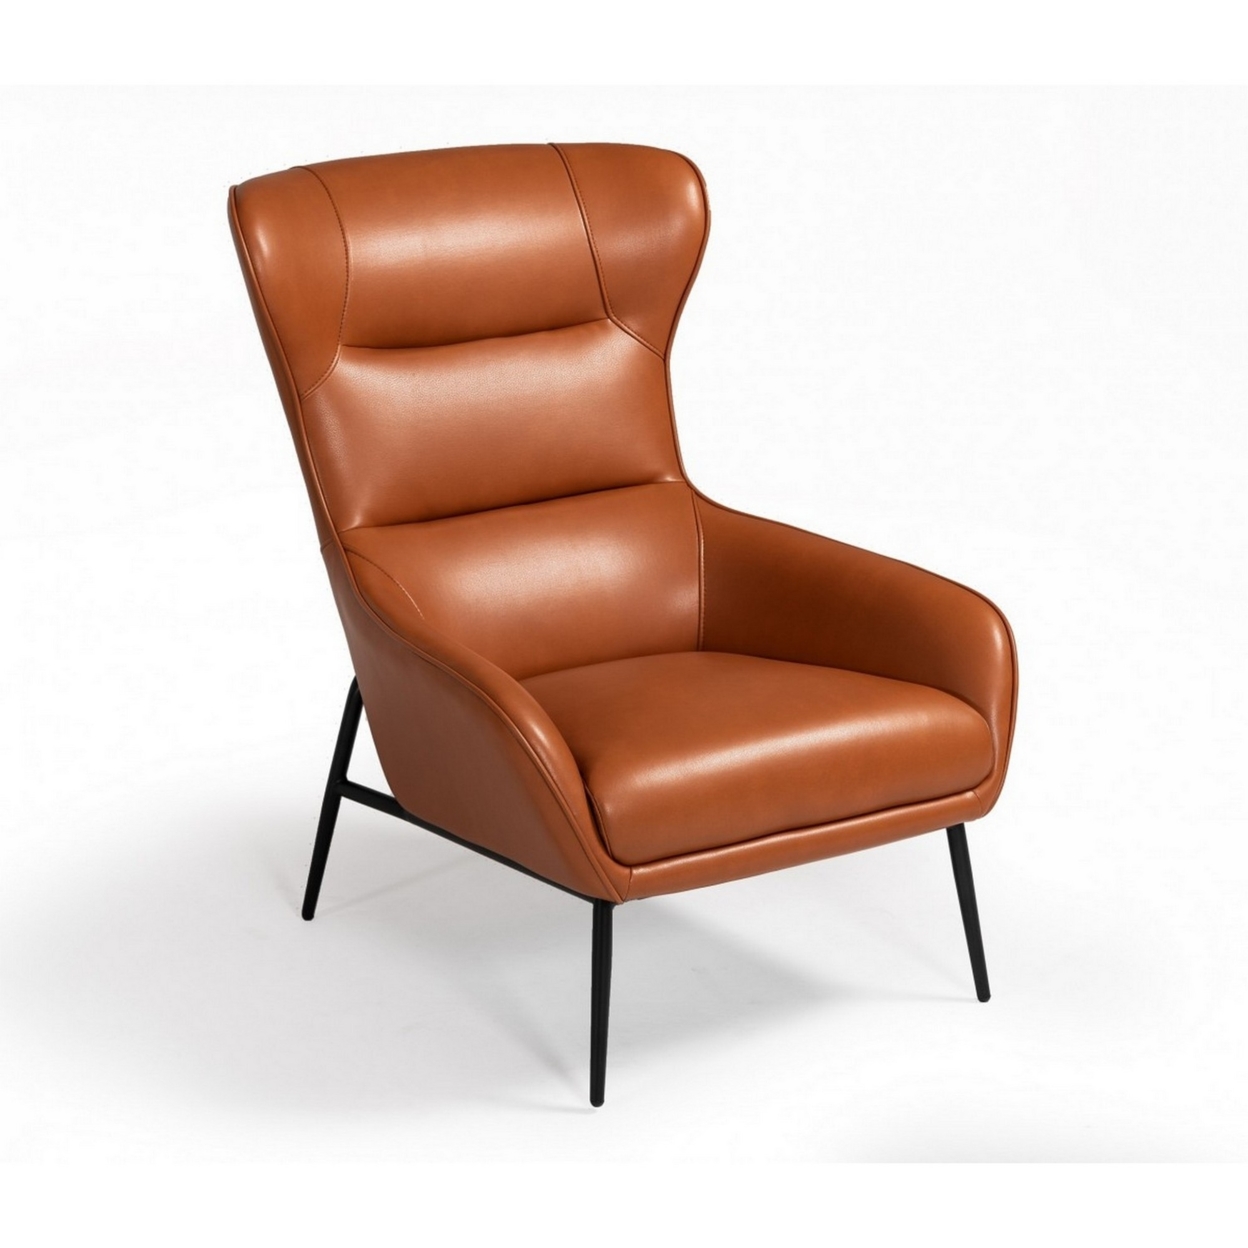 Leatherette Bucket Style Lounge Chair With Tufted Details, Brown- Saltoro Sherpi